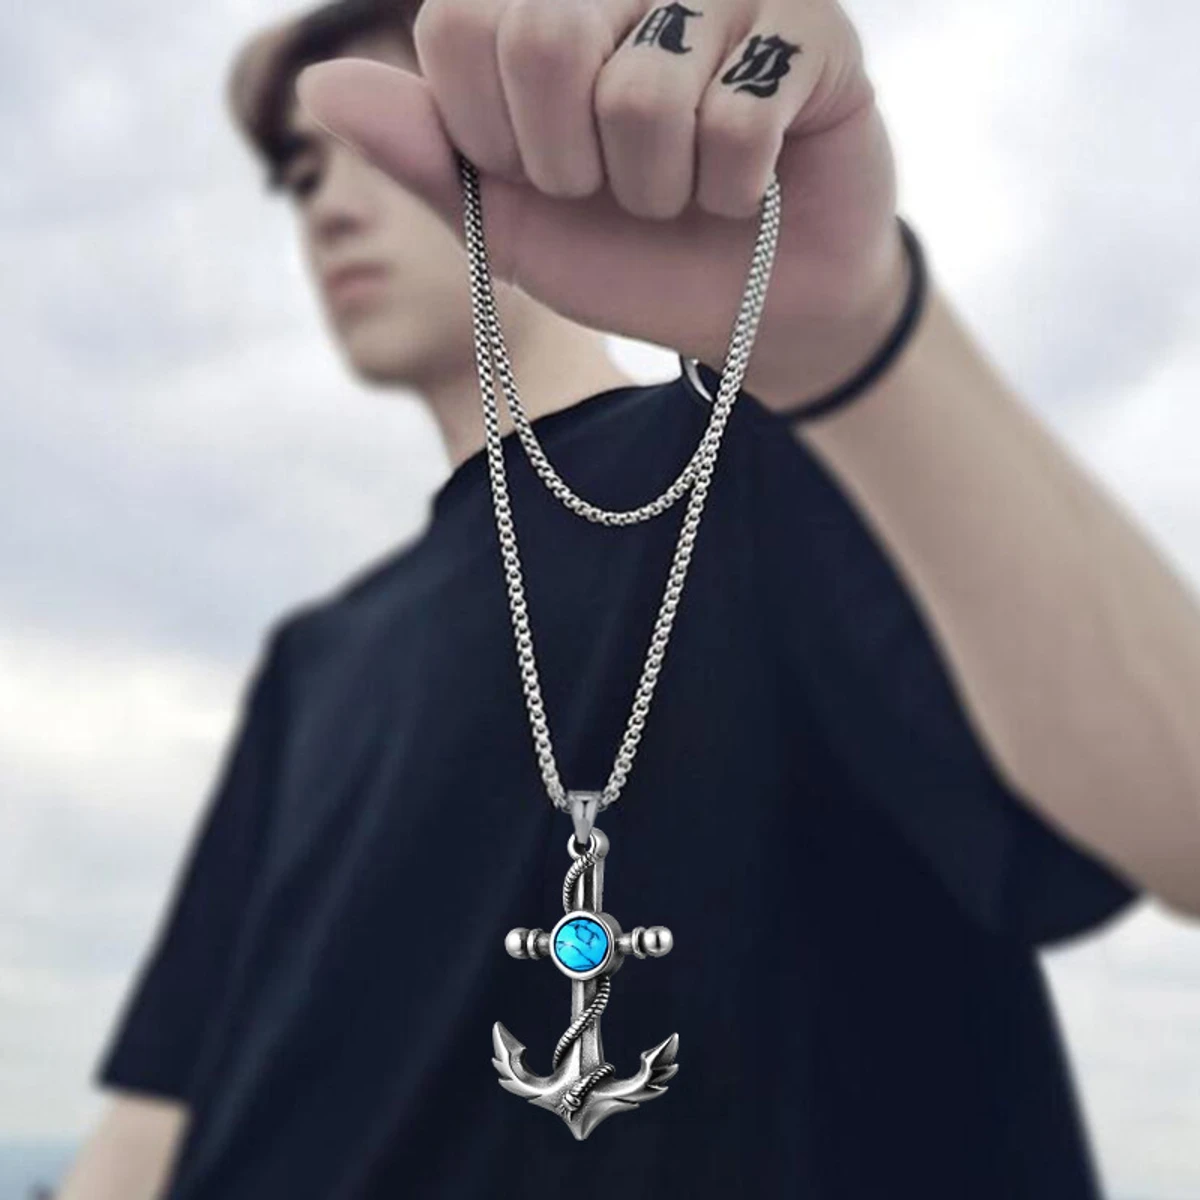 Men's Vintage Turquoise Anchor Biker Necklace Stainless Steel